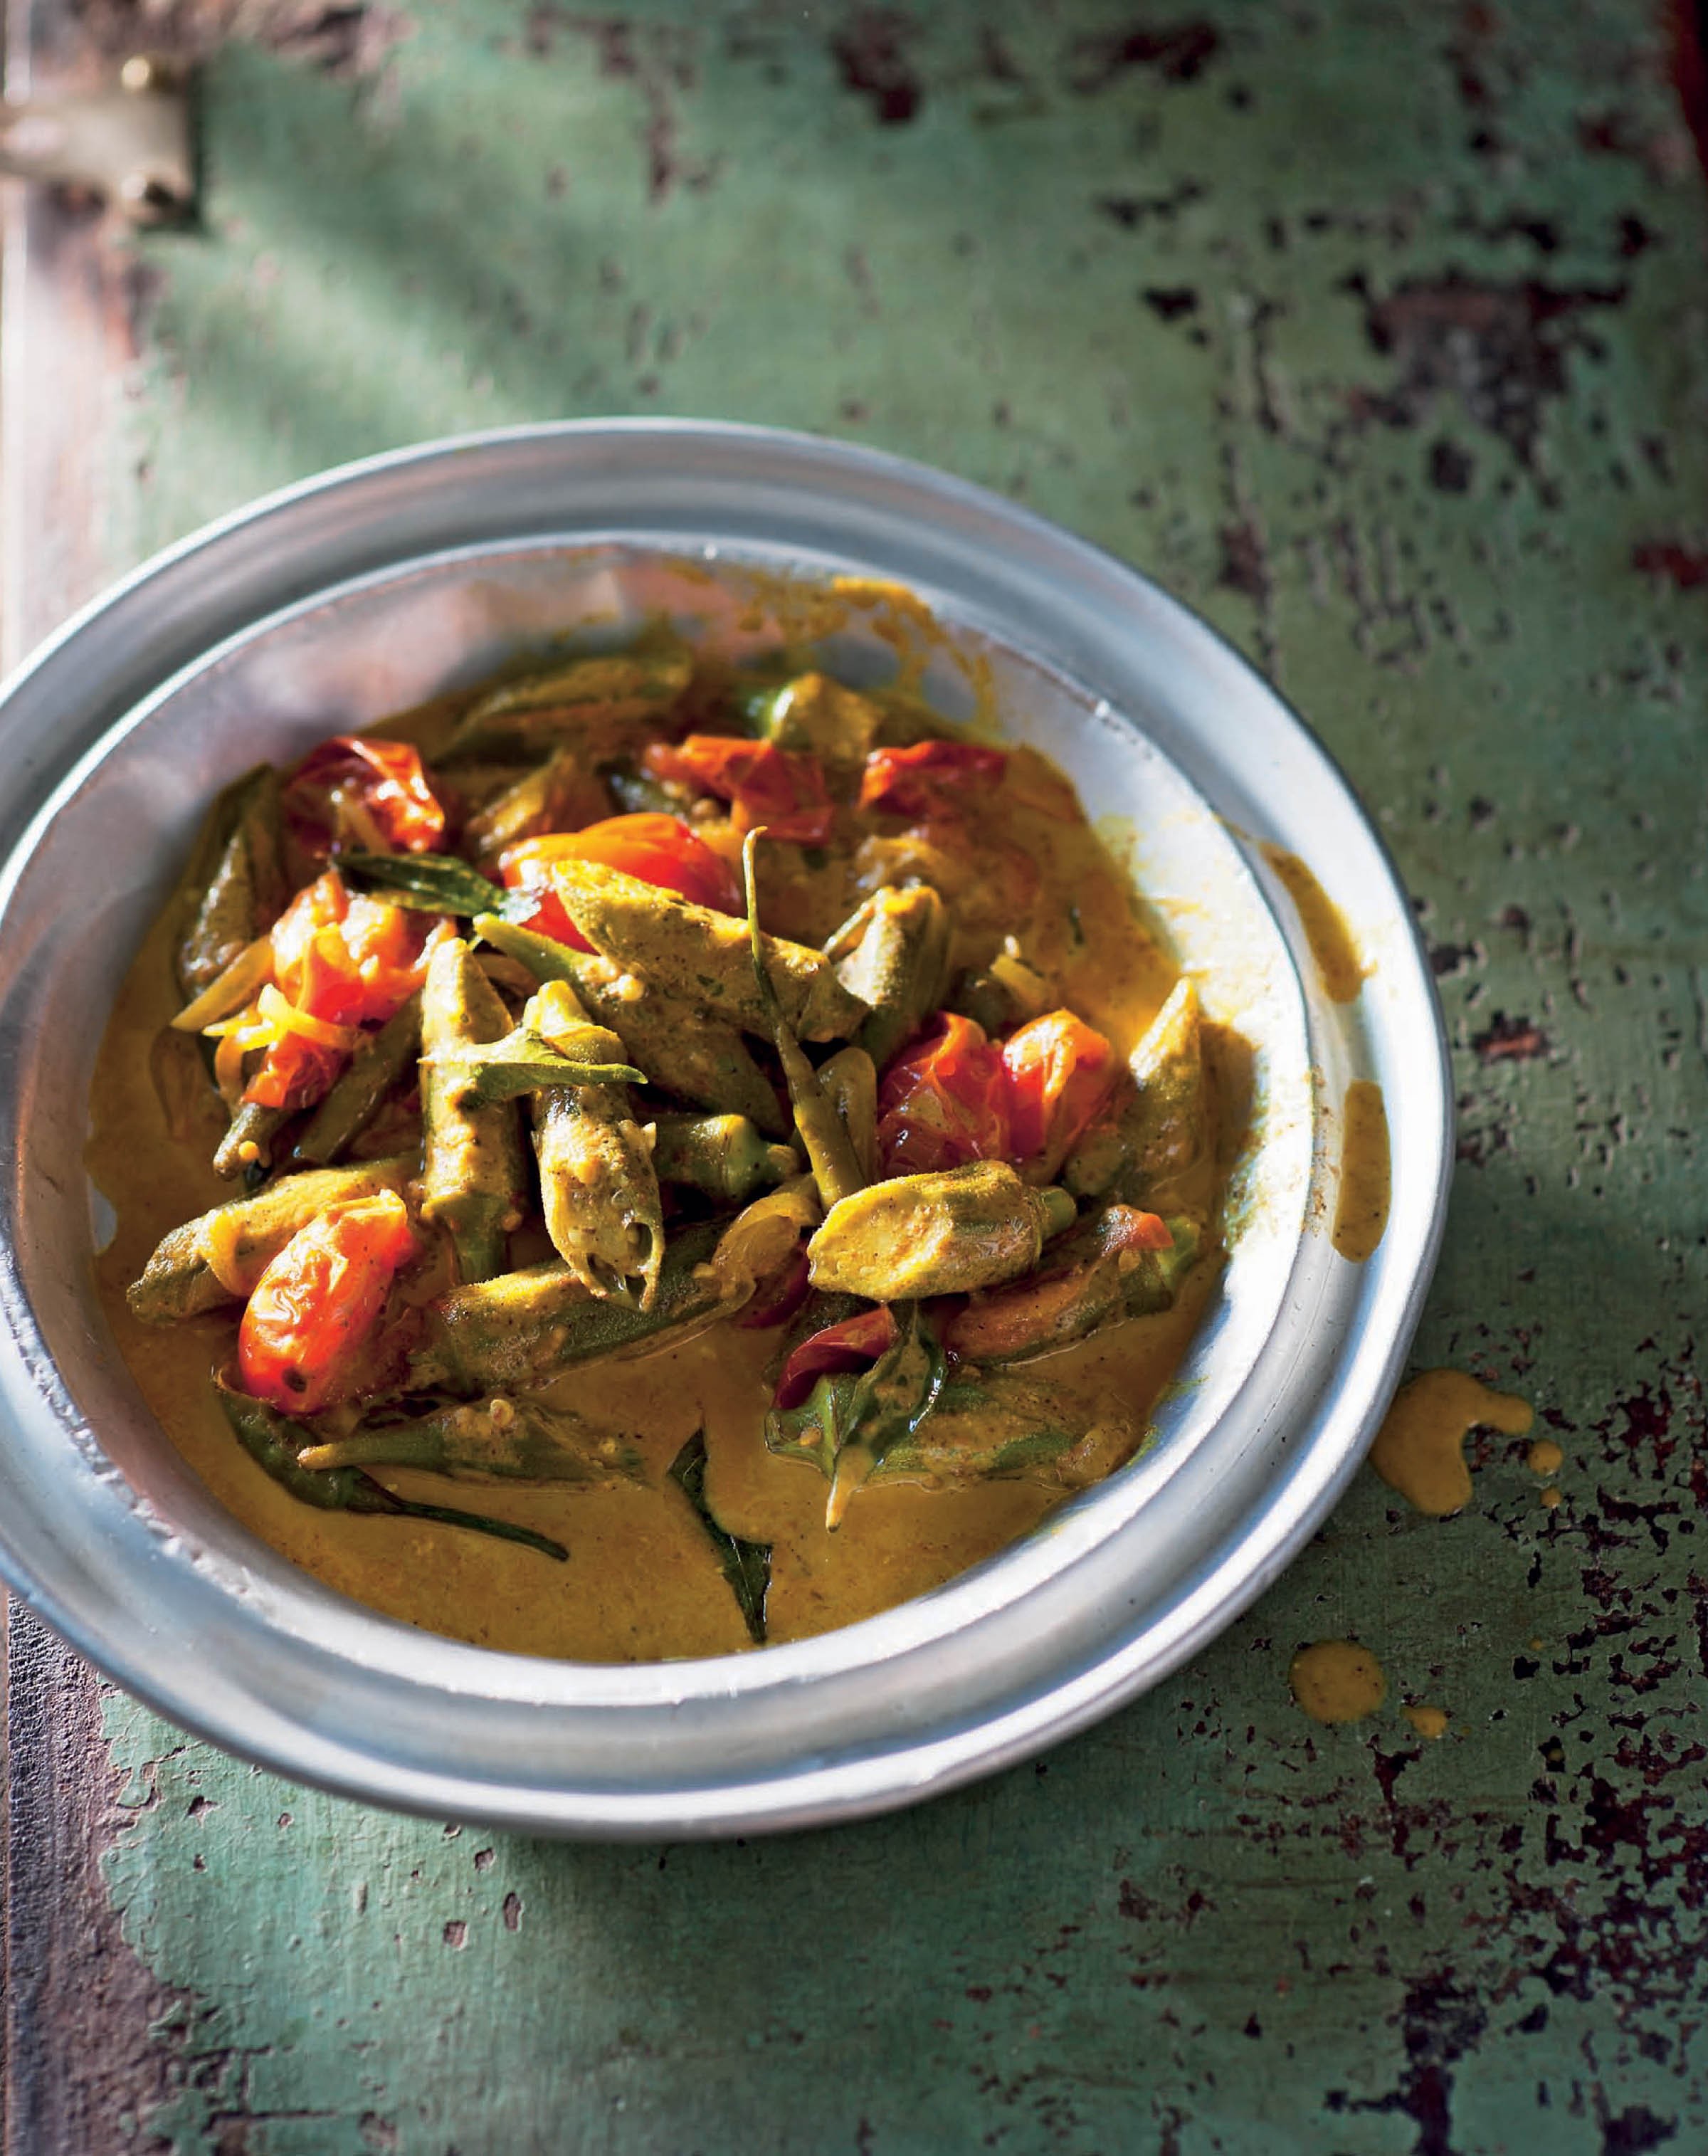 Okra Curry from Hidden Kitchens of Sri Lanka by Bree Hutchins